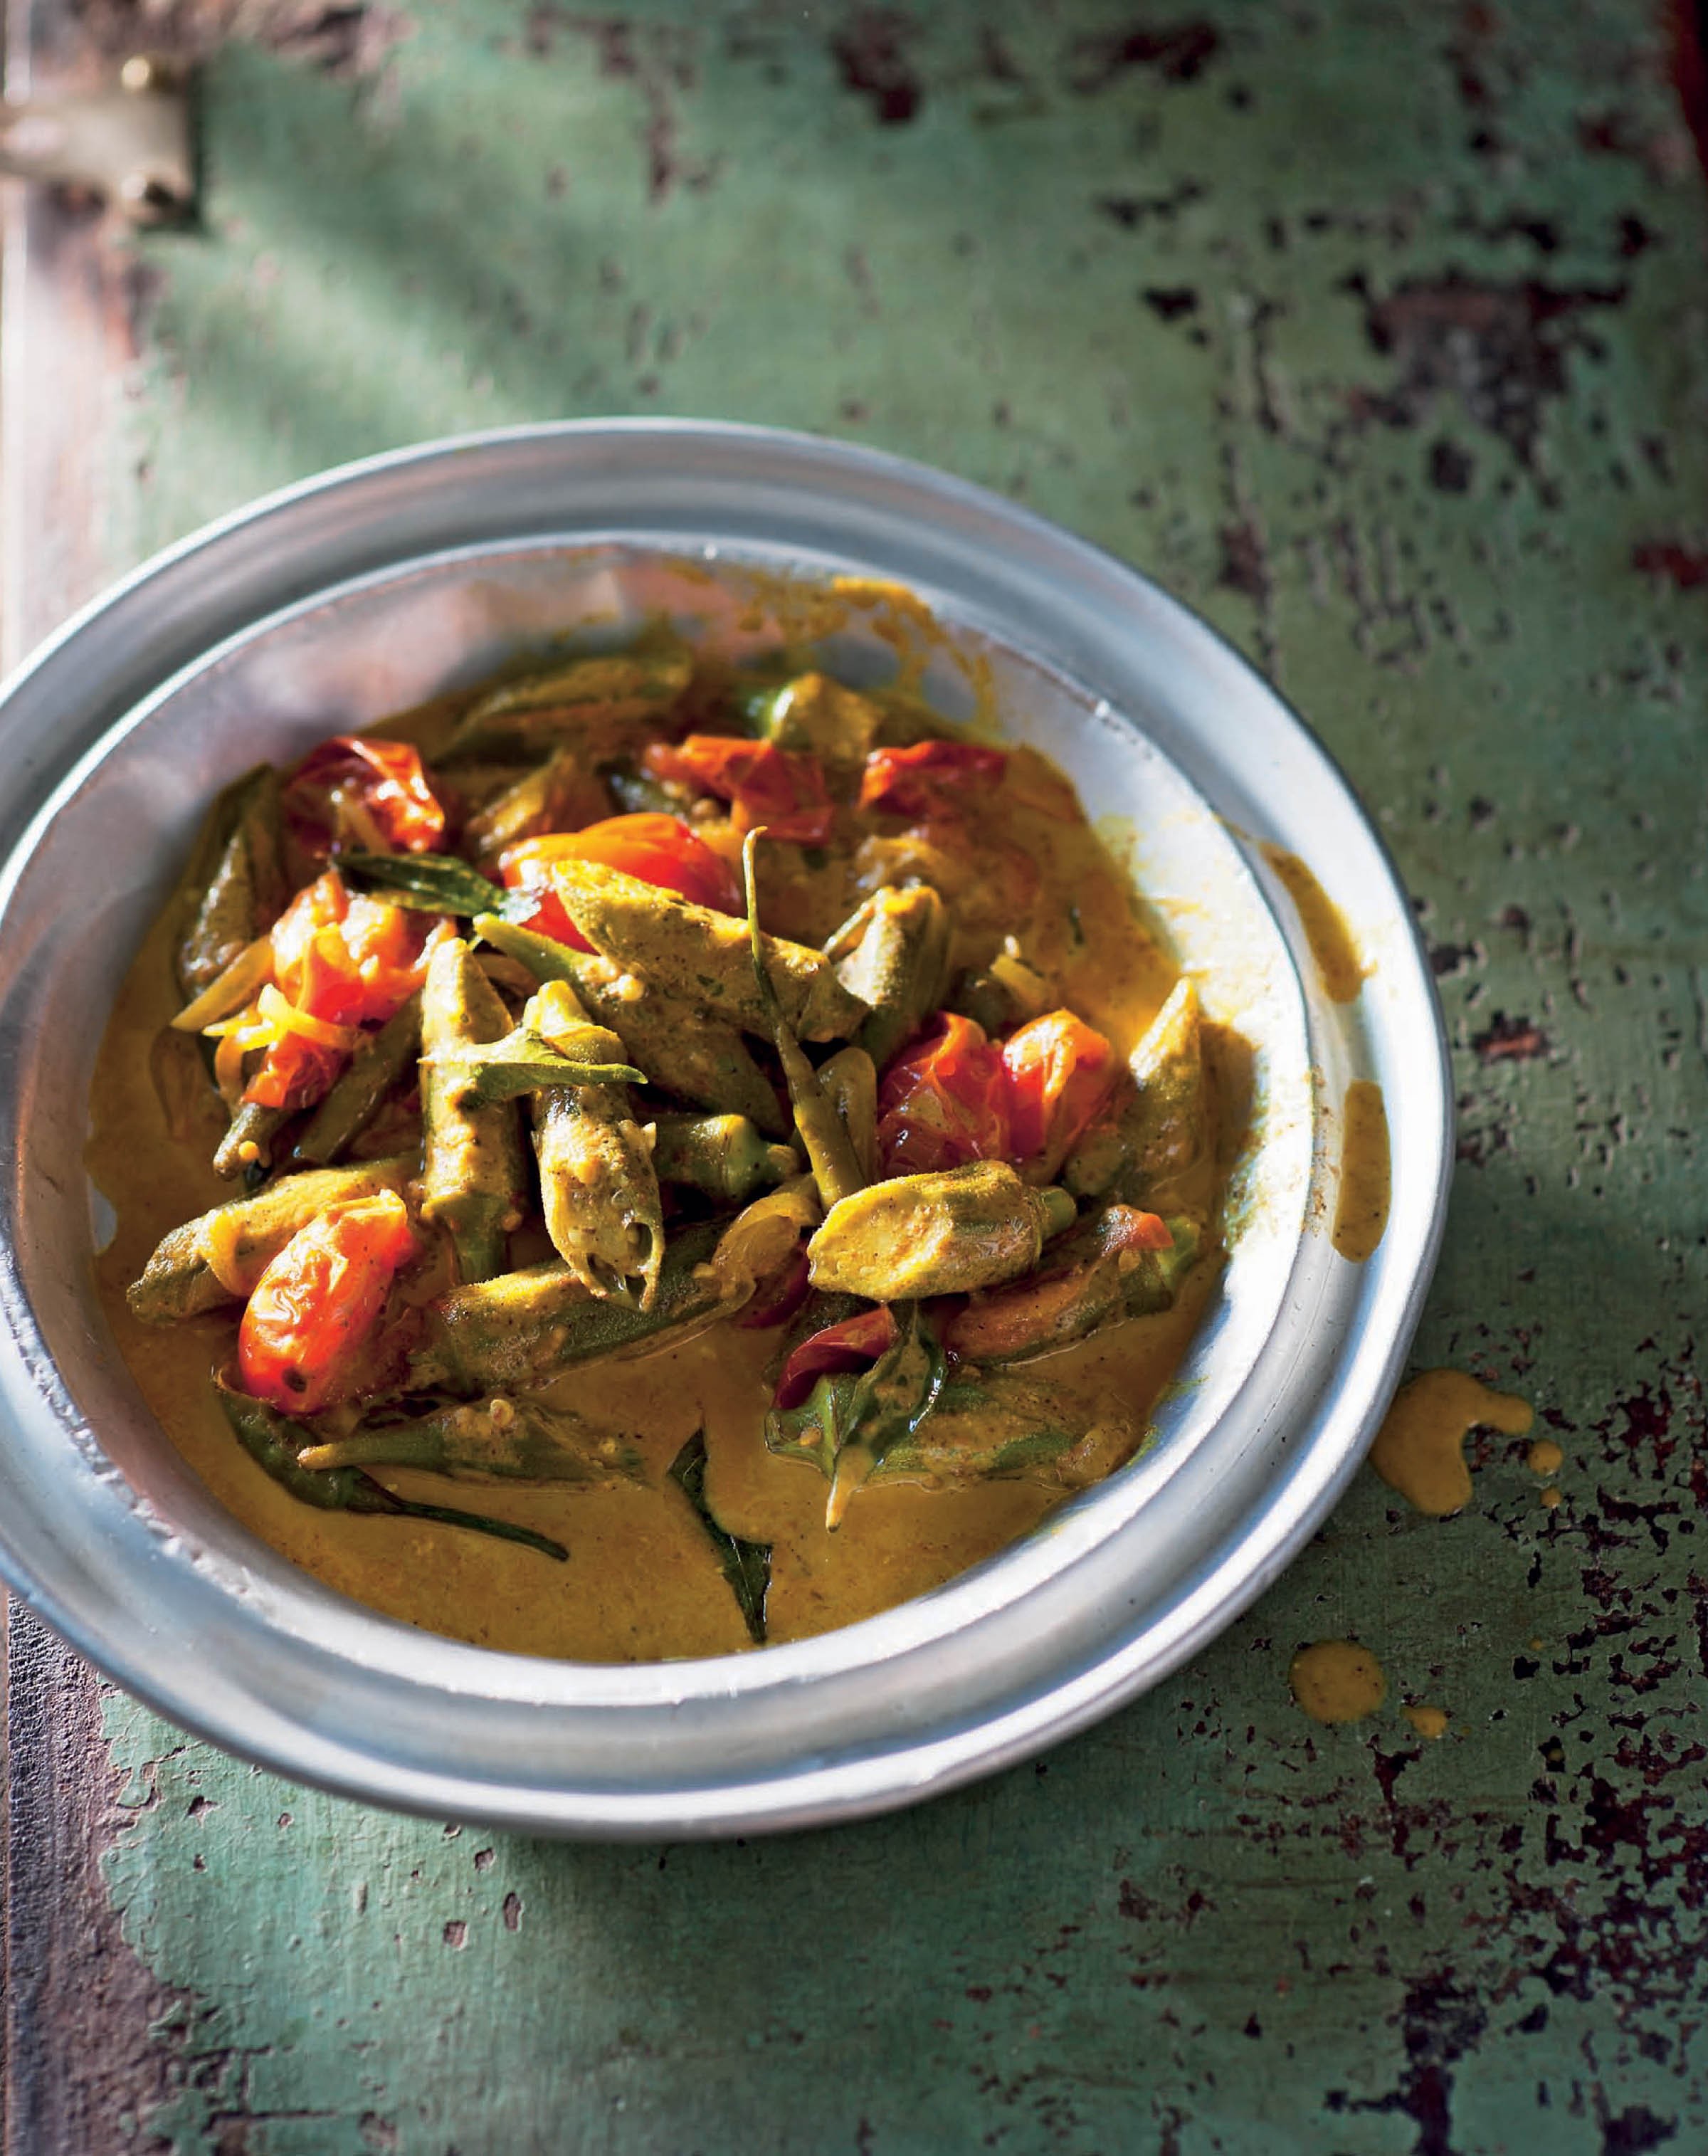 Okra Curry from Hidden Kitchens of Sri Lanka by Bree Hutchins